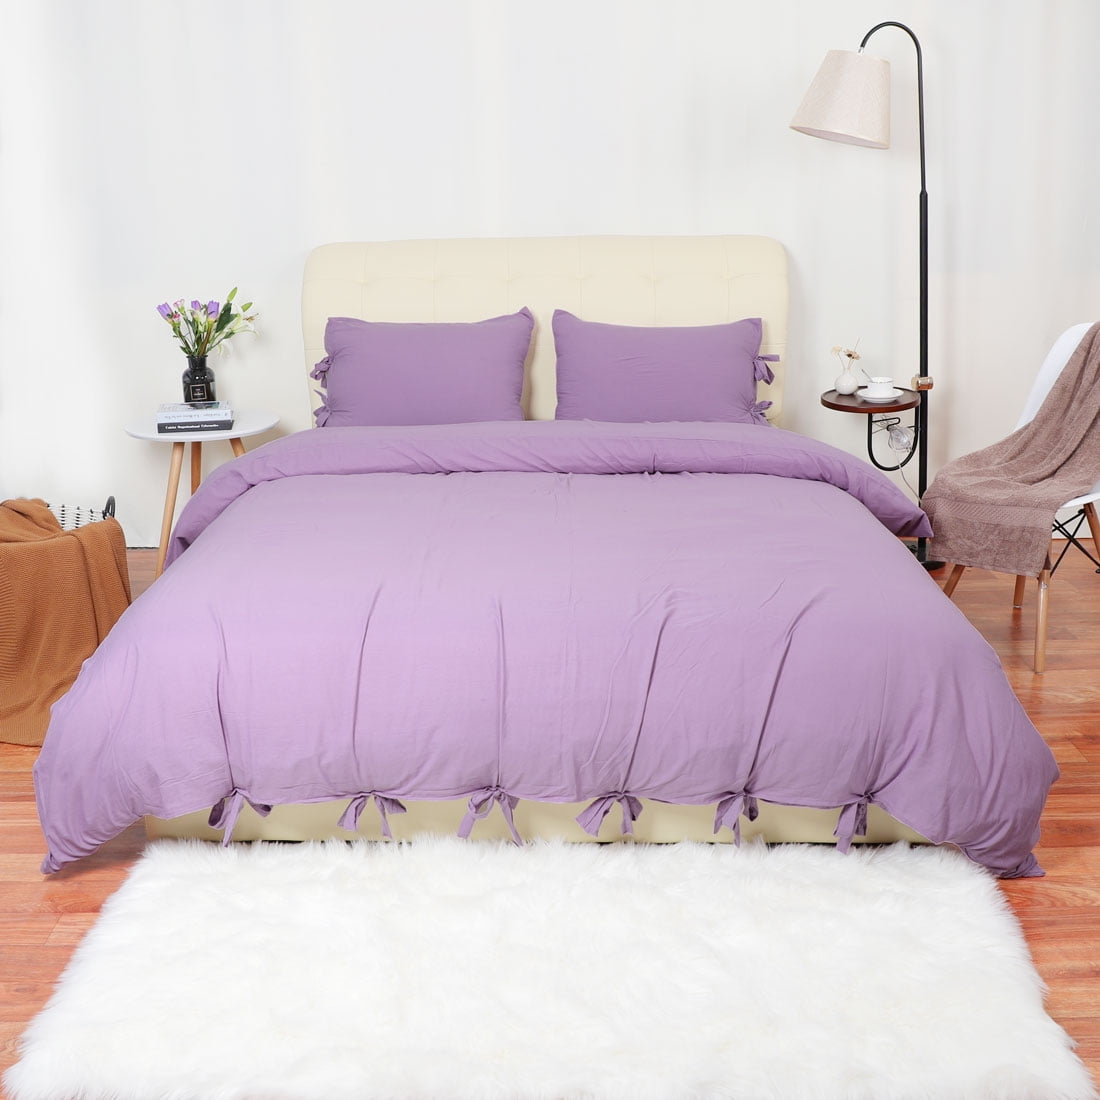 Details about   1000 Thread Count Soft Egyptian Cotton 1 PC Bed Skirt UK Sizes & Solid Colors 